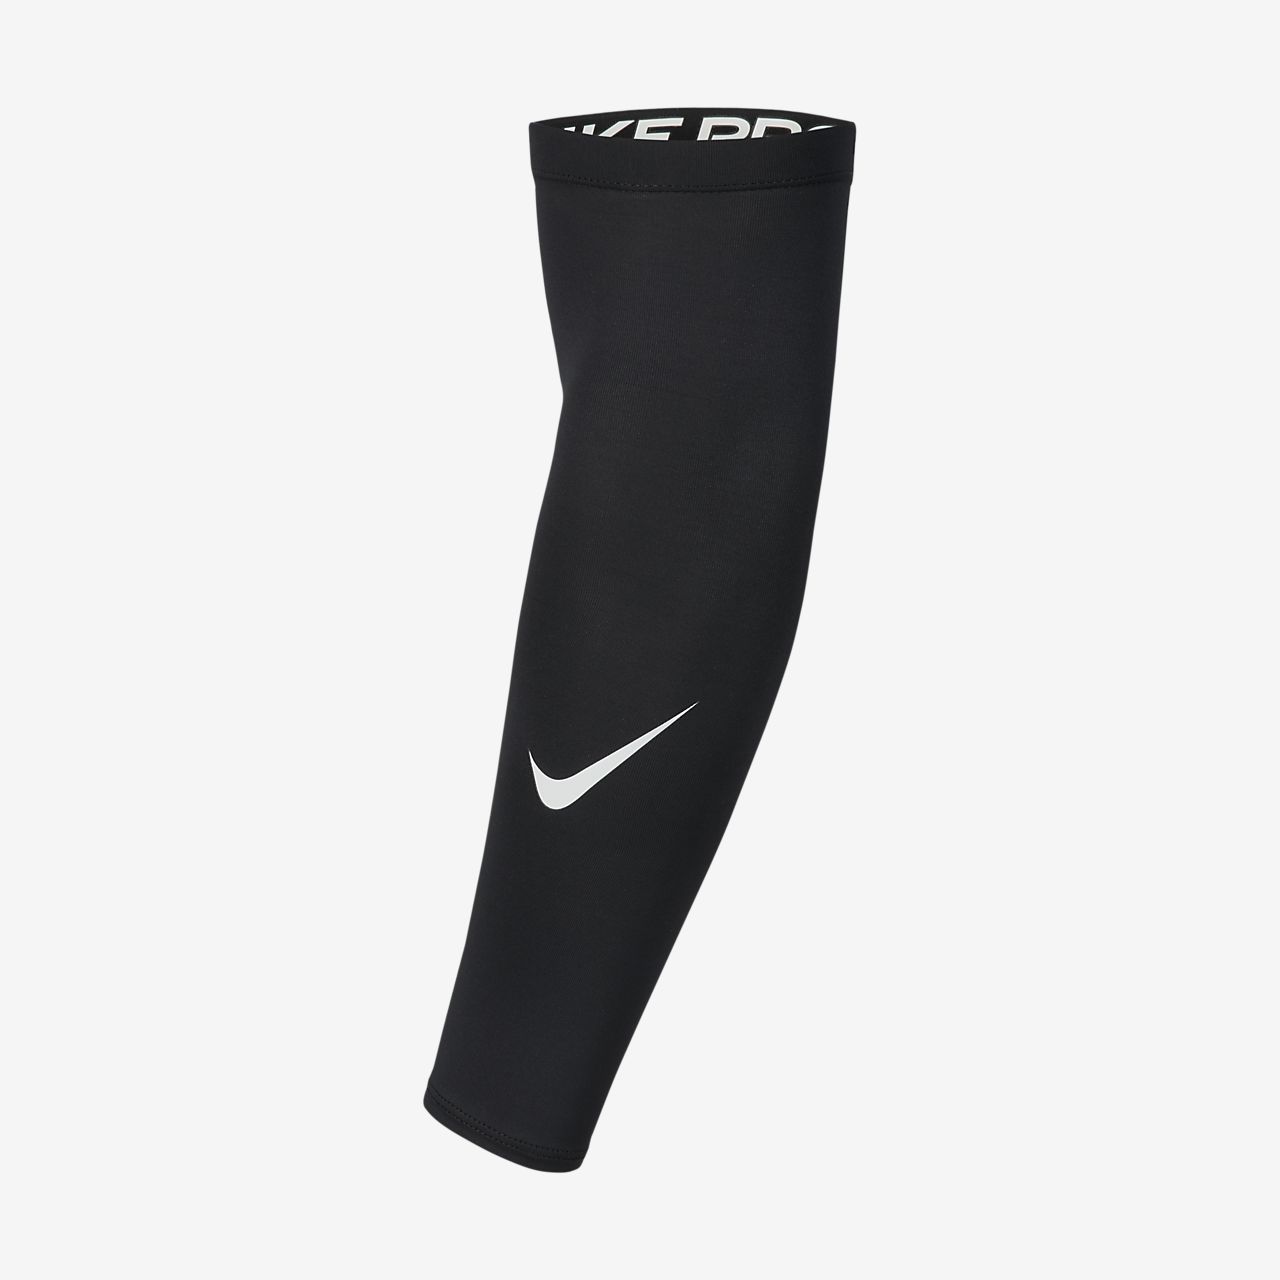 nike pro dry fit